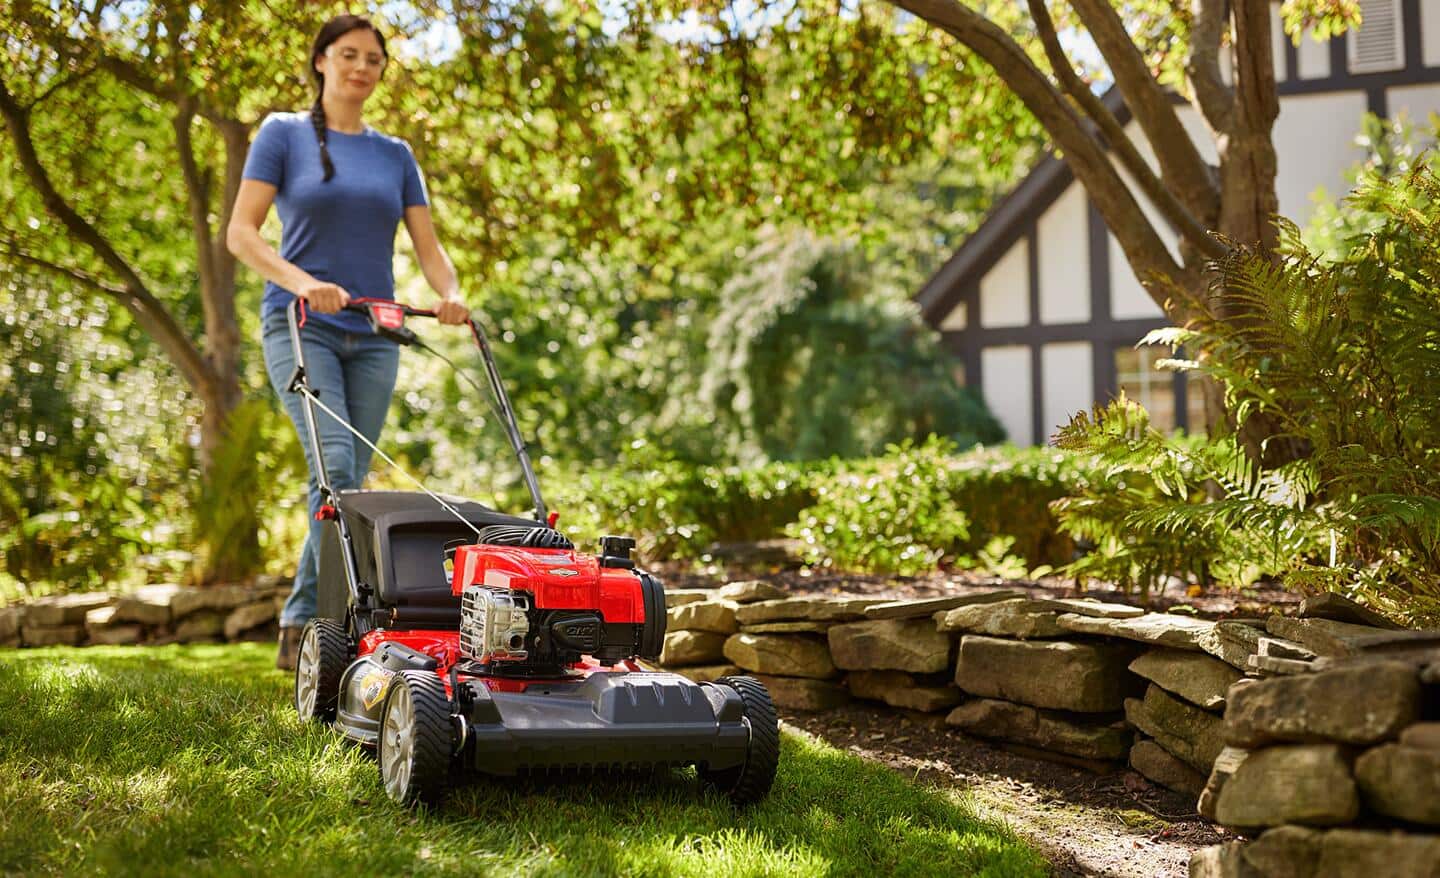 How to Maintain Outdoor Power Tools - The Home Depot